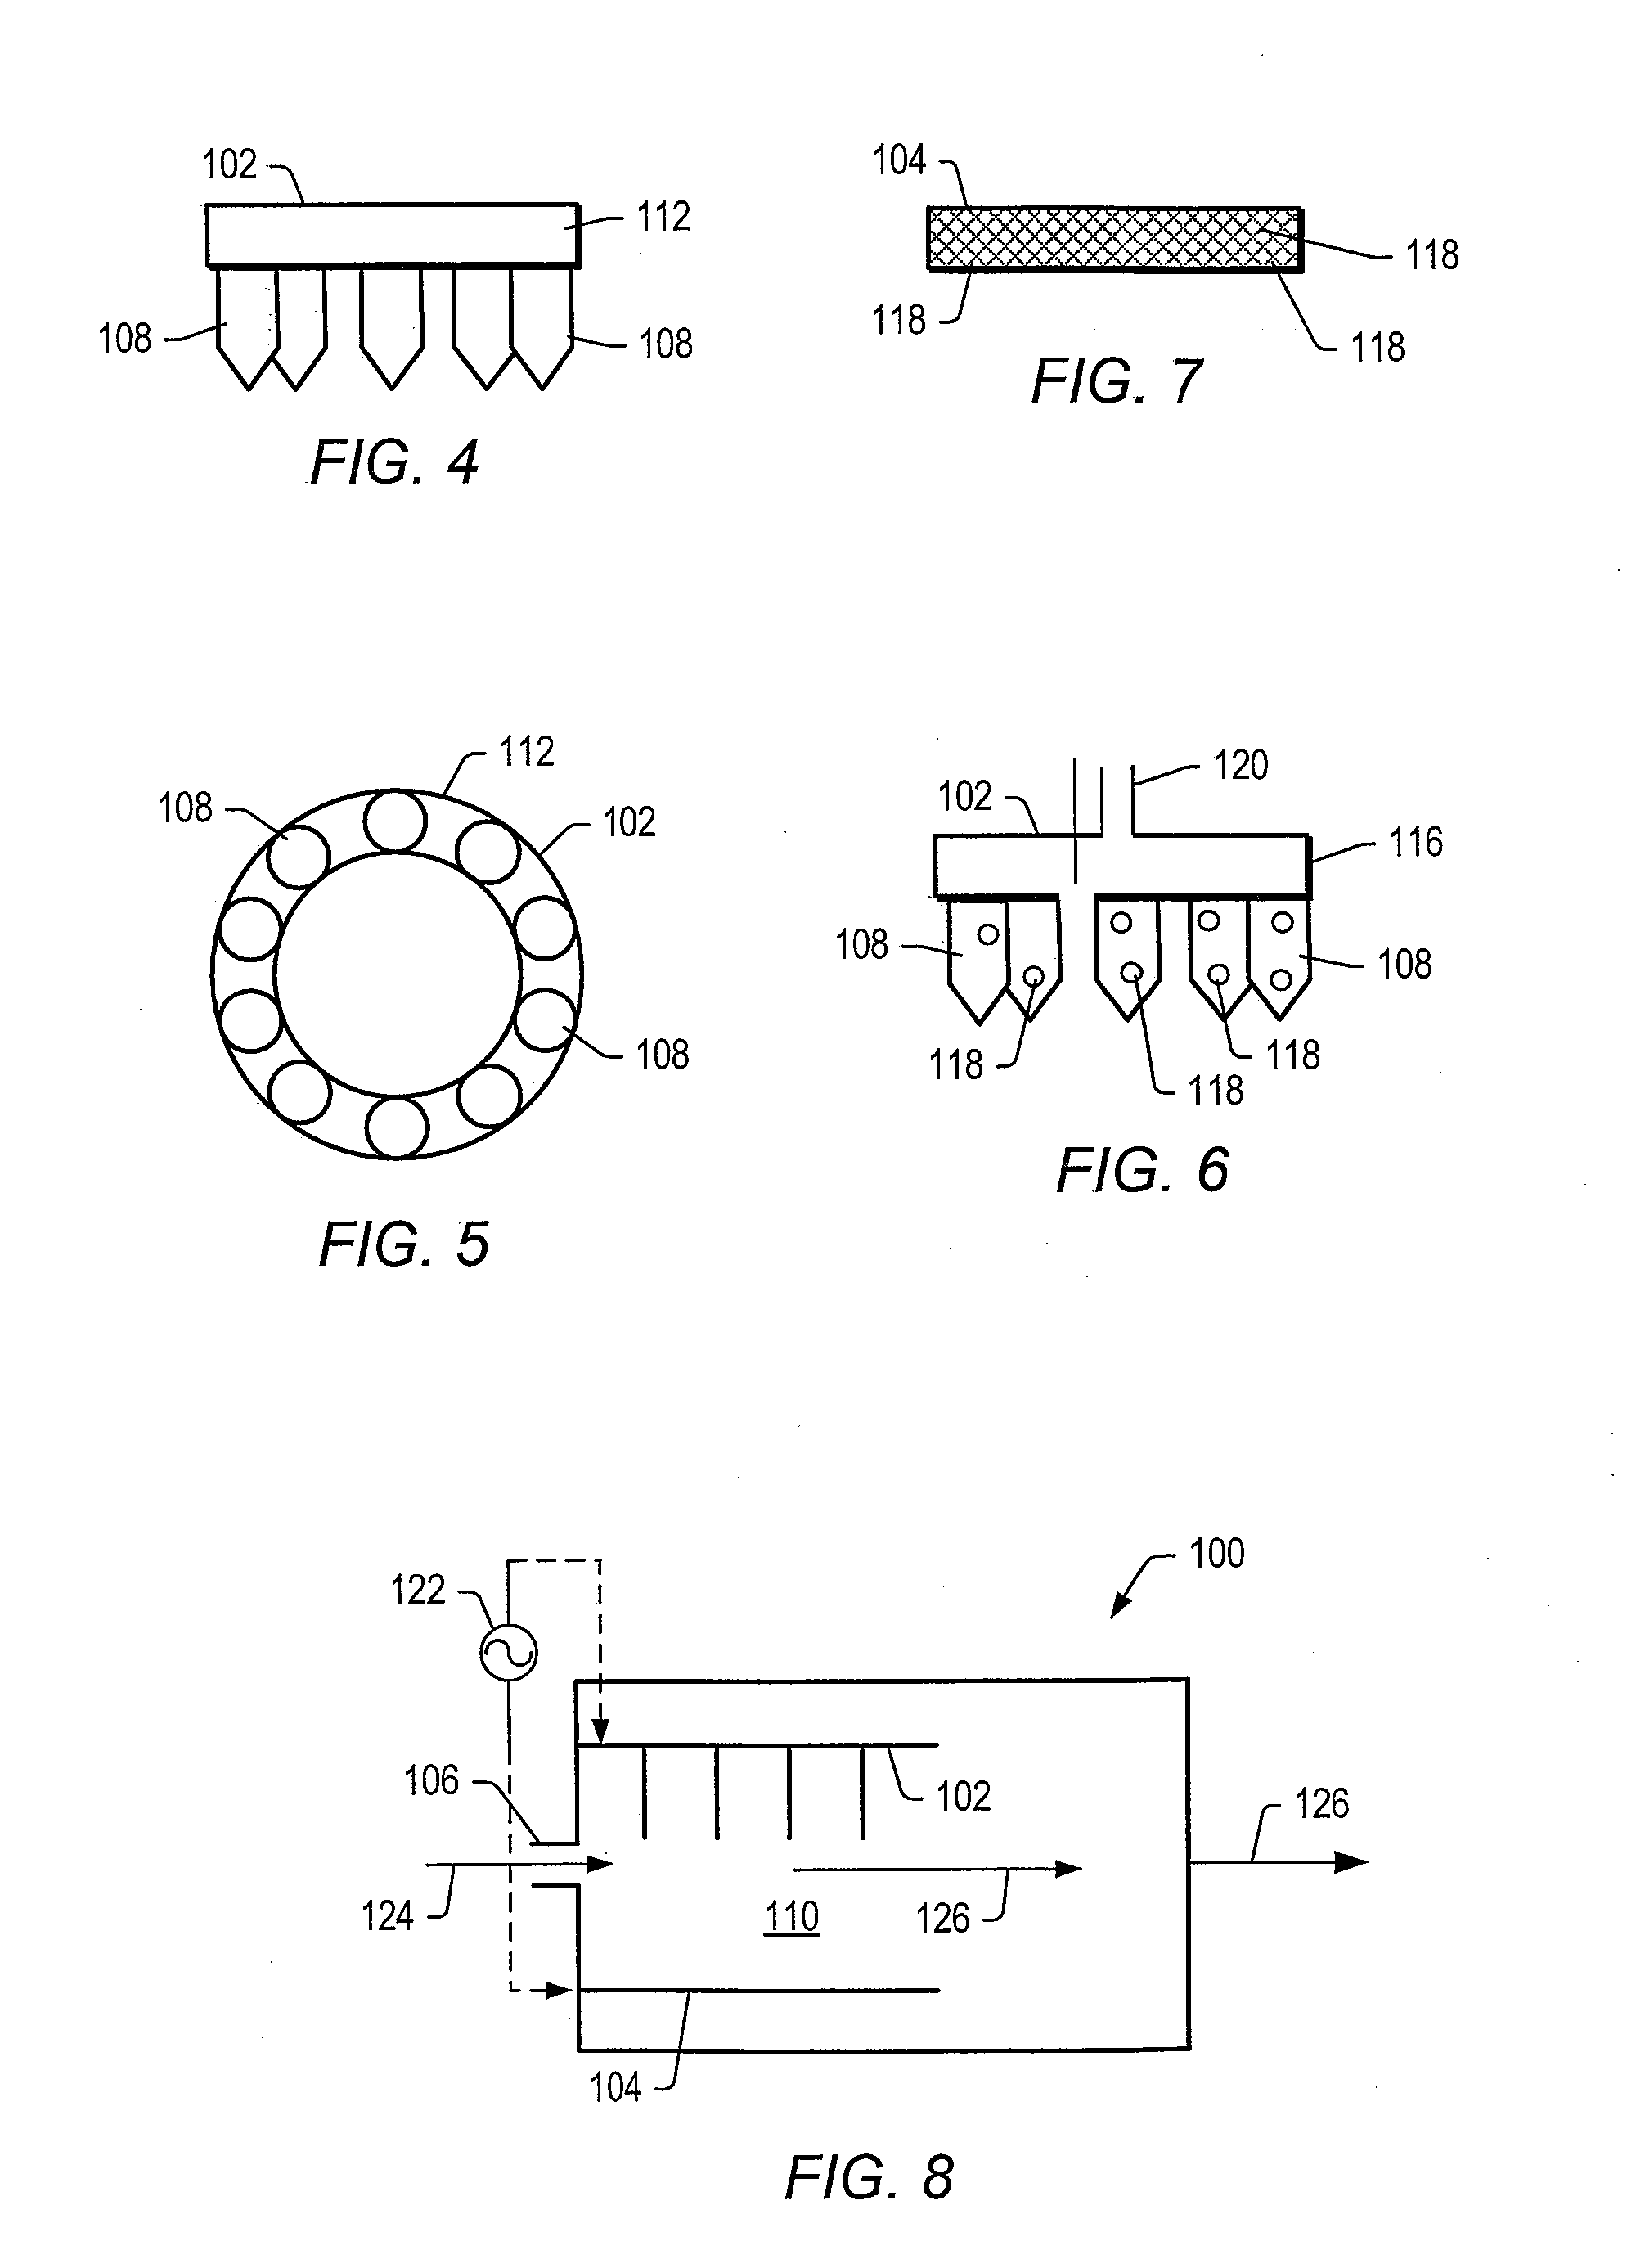 Methods and systems for producing fuel for an internal combustion engine using a low-temperature plasma system